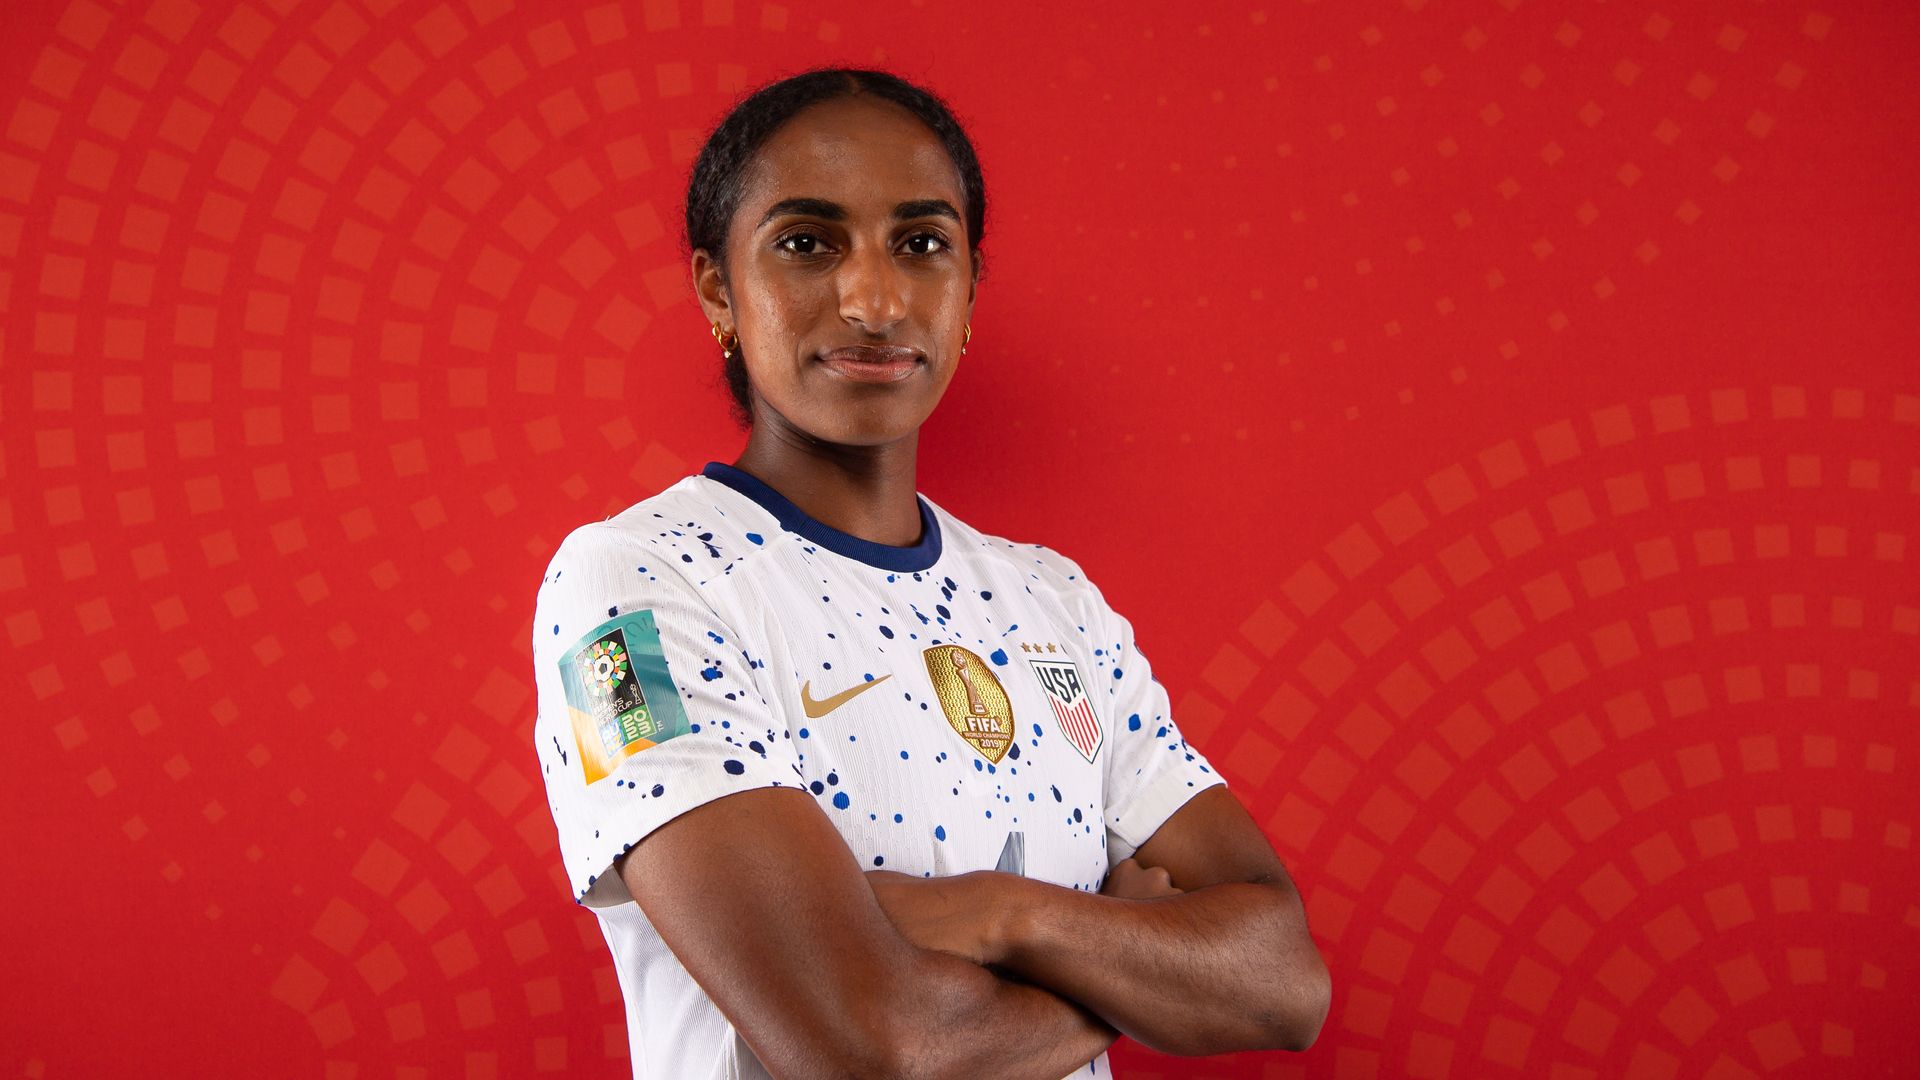 A player on the U.S. women's national soccer team wearing a white jersey with a splattered blue design stands with her arms crossed and a slight smile. 